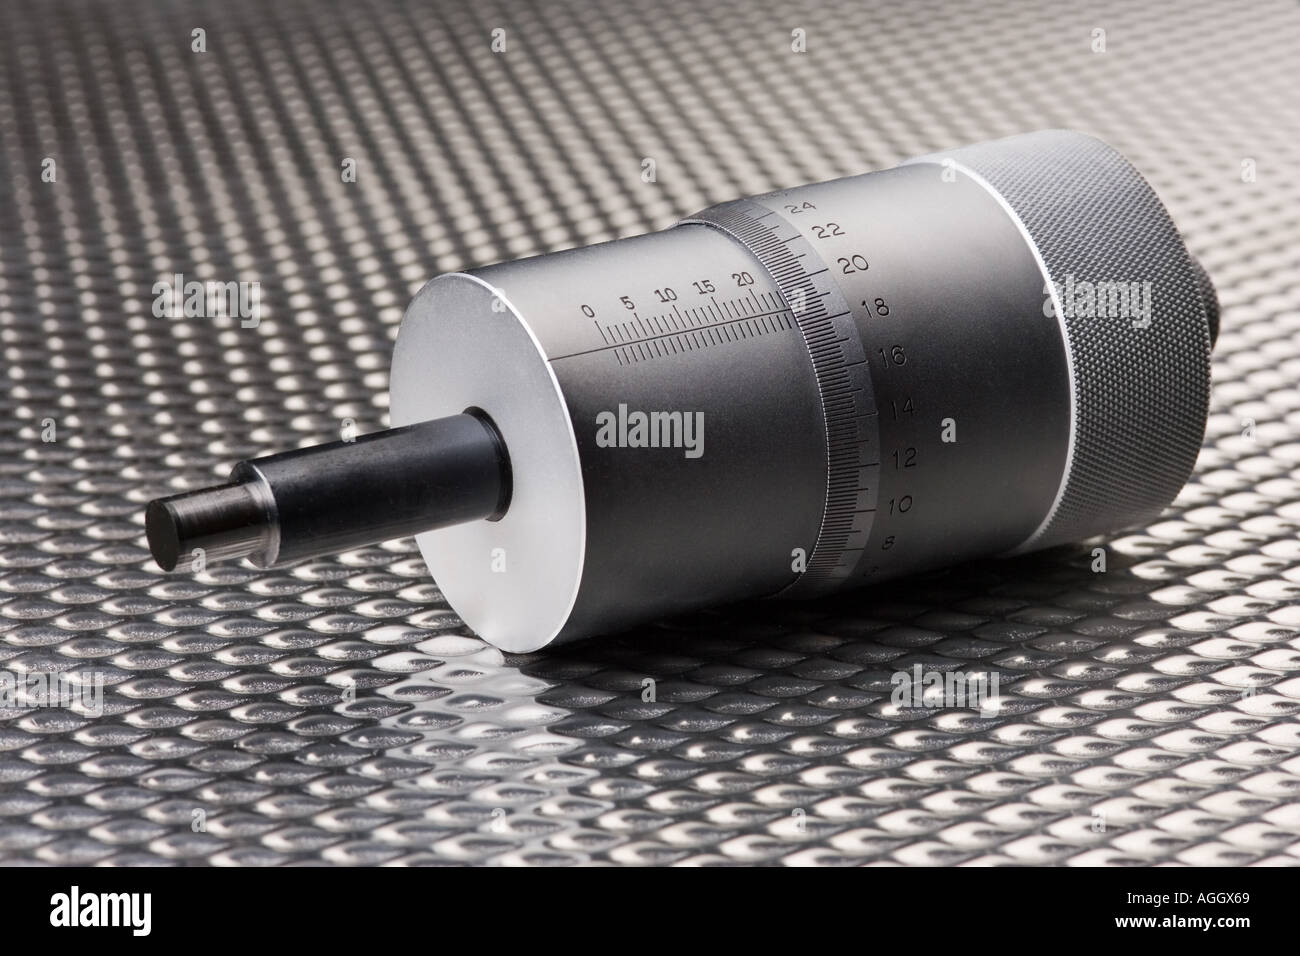 A precision micrometer spindle used for precision measurements Stock Photo